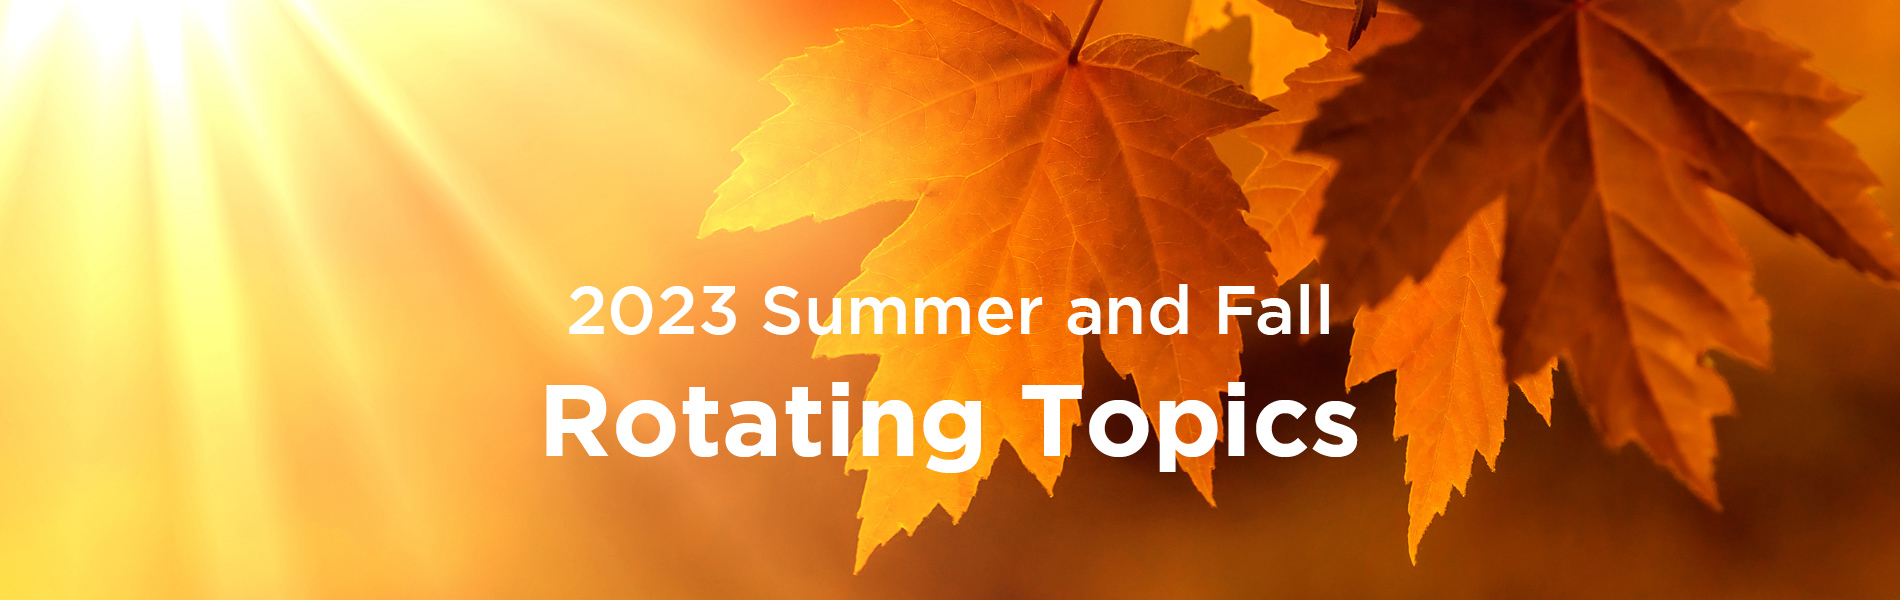 2023 Summer and Fall Rotating Topics, banner of bright sun and fall leaves